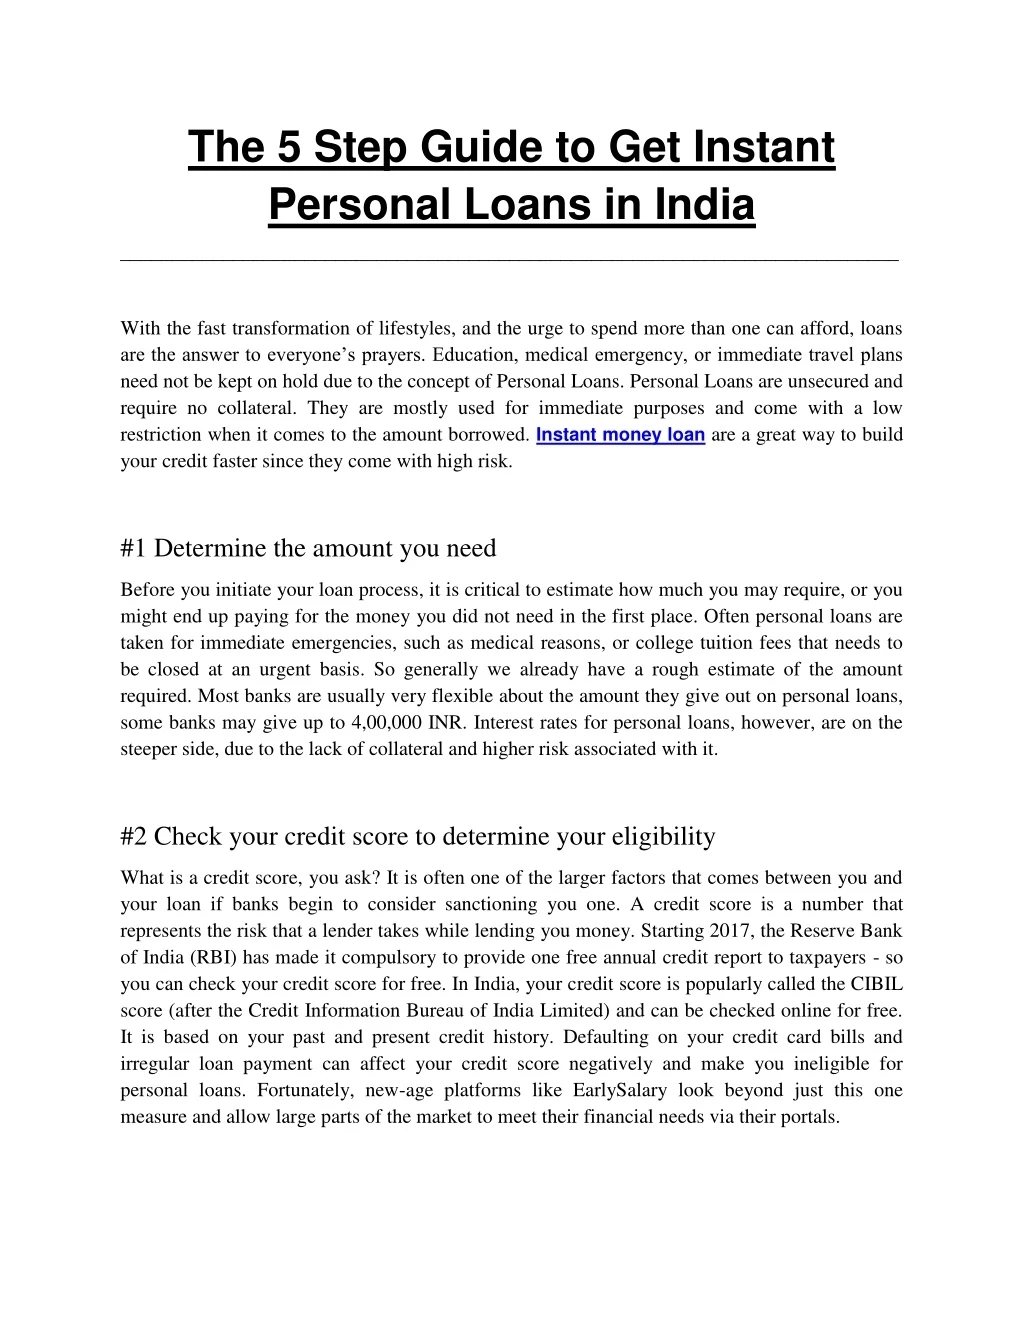 the 5 step guide to get instant personal loans